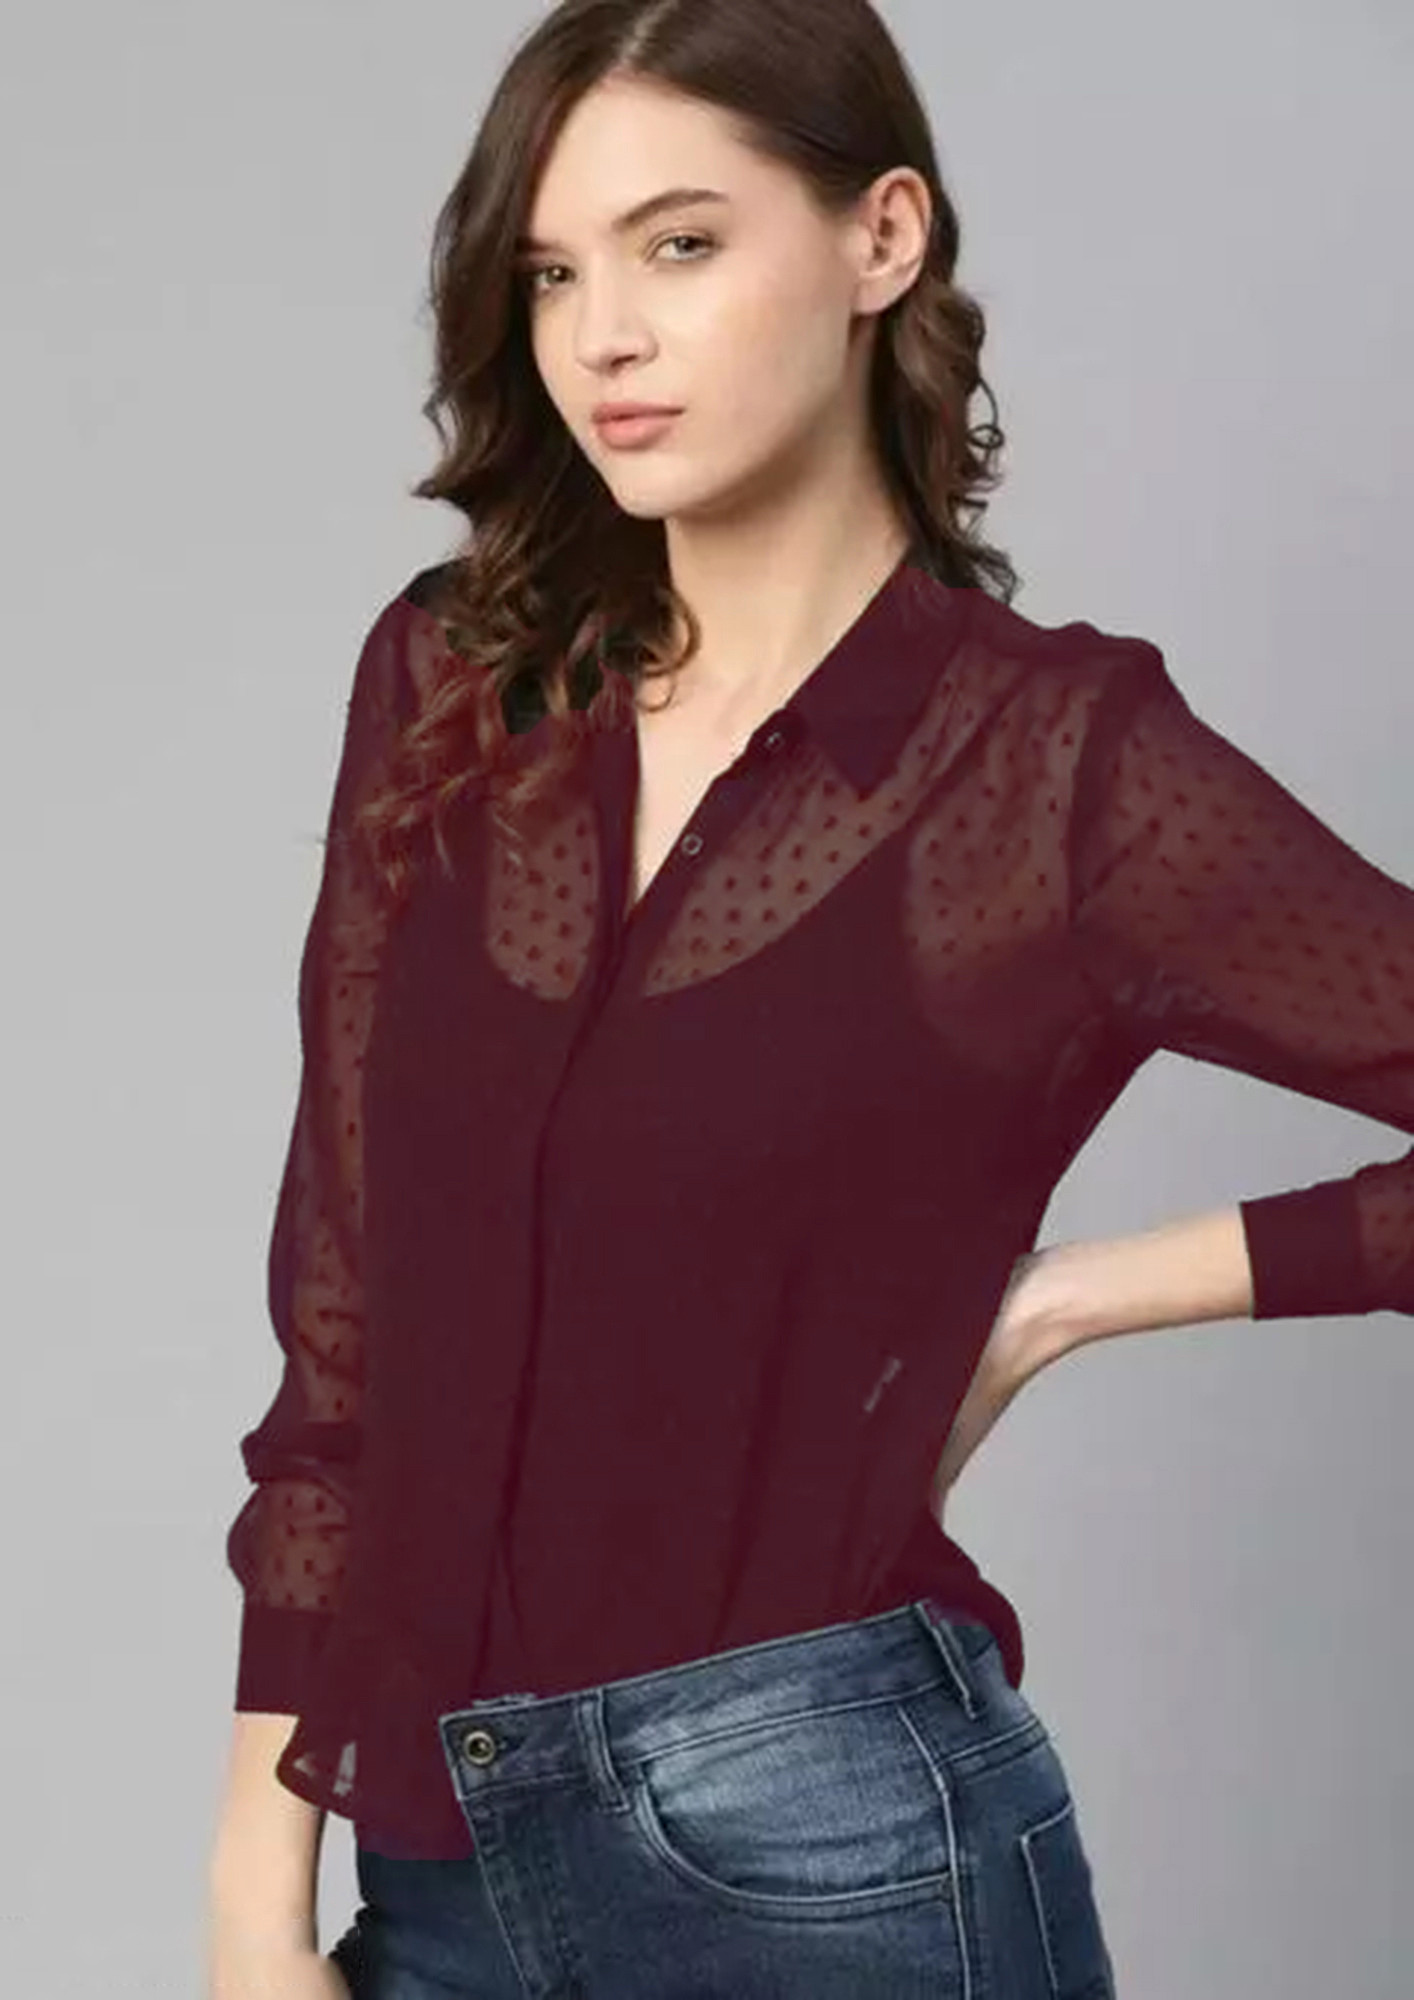 Women Polyester Shirts - Buy Women Polyester Shirts online in India